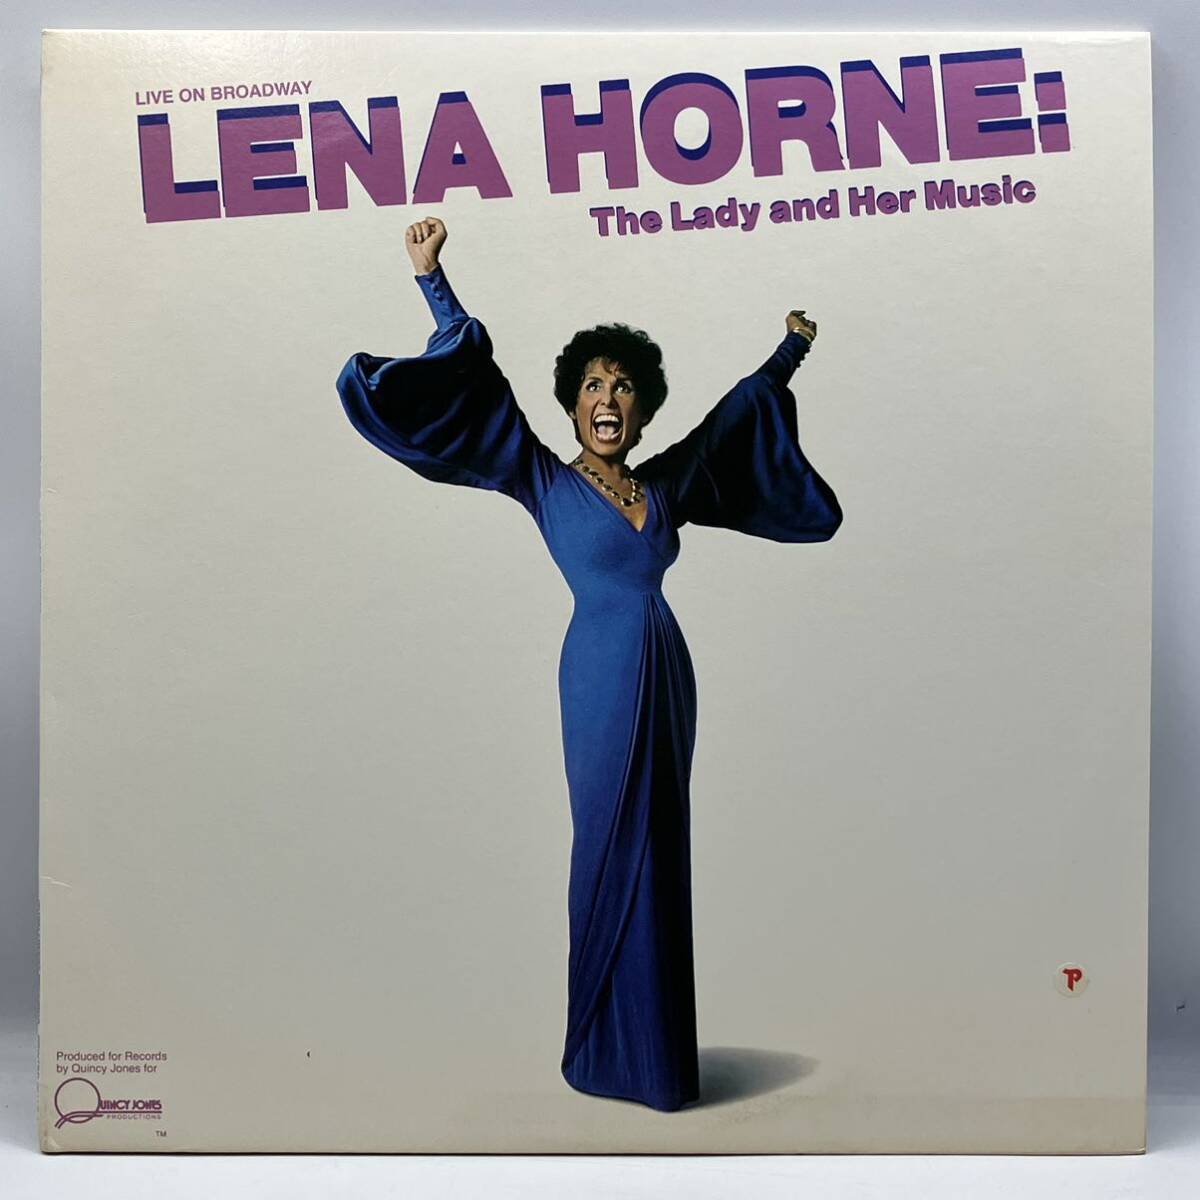 A0513a【LP 】　LENA HORNE THE LADY AND HER MUSIC LIVE ON BROADWAY _画像1